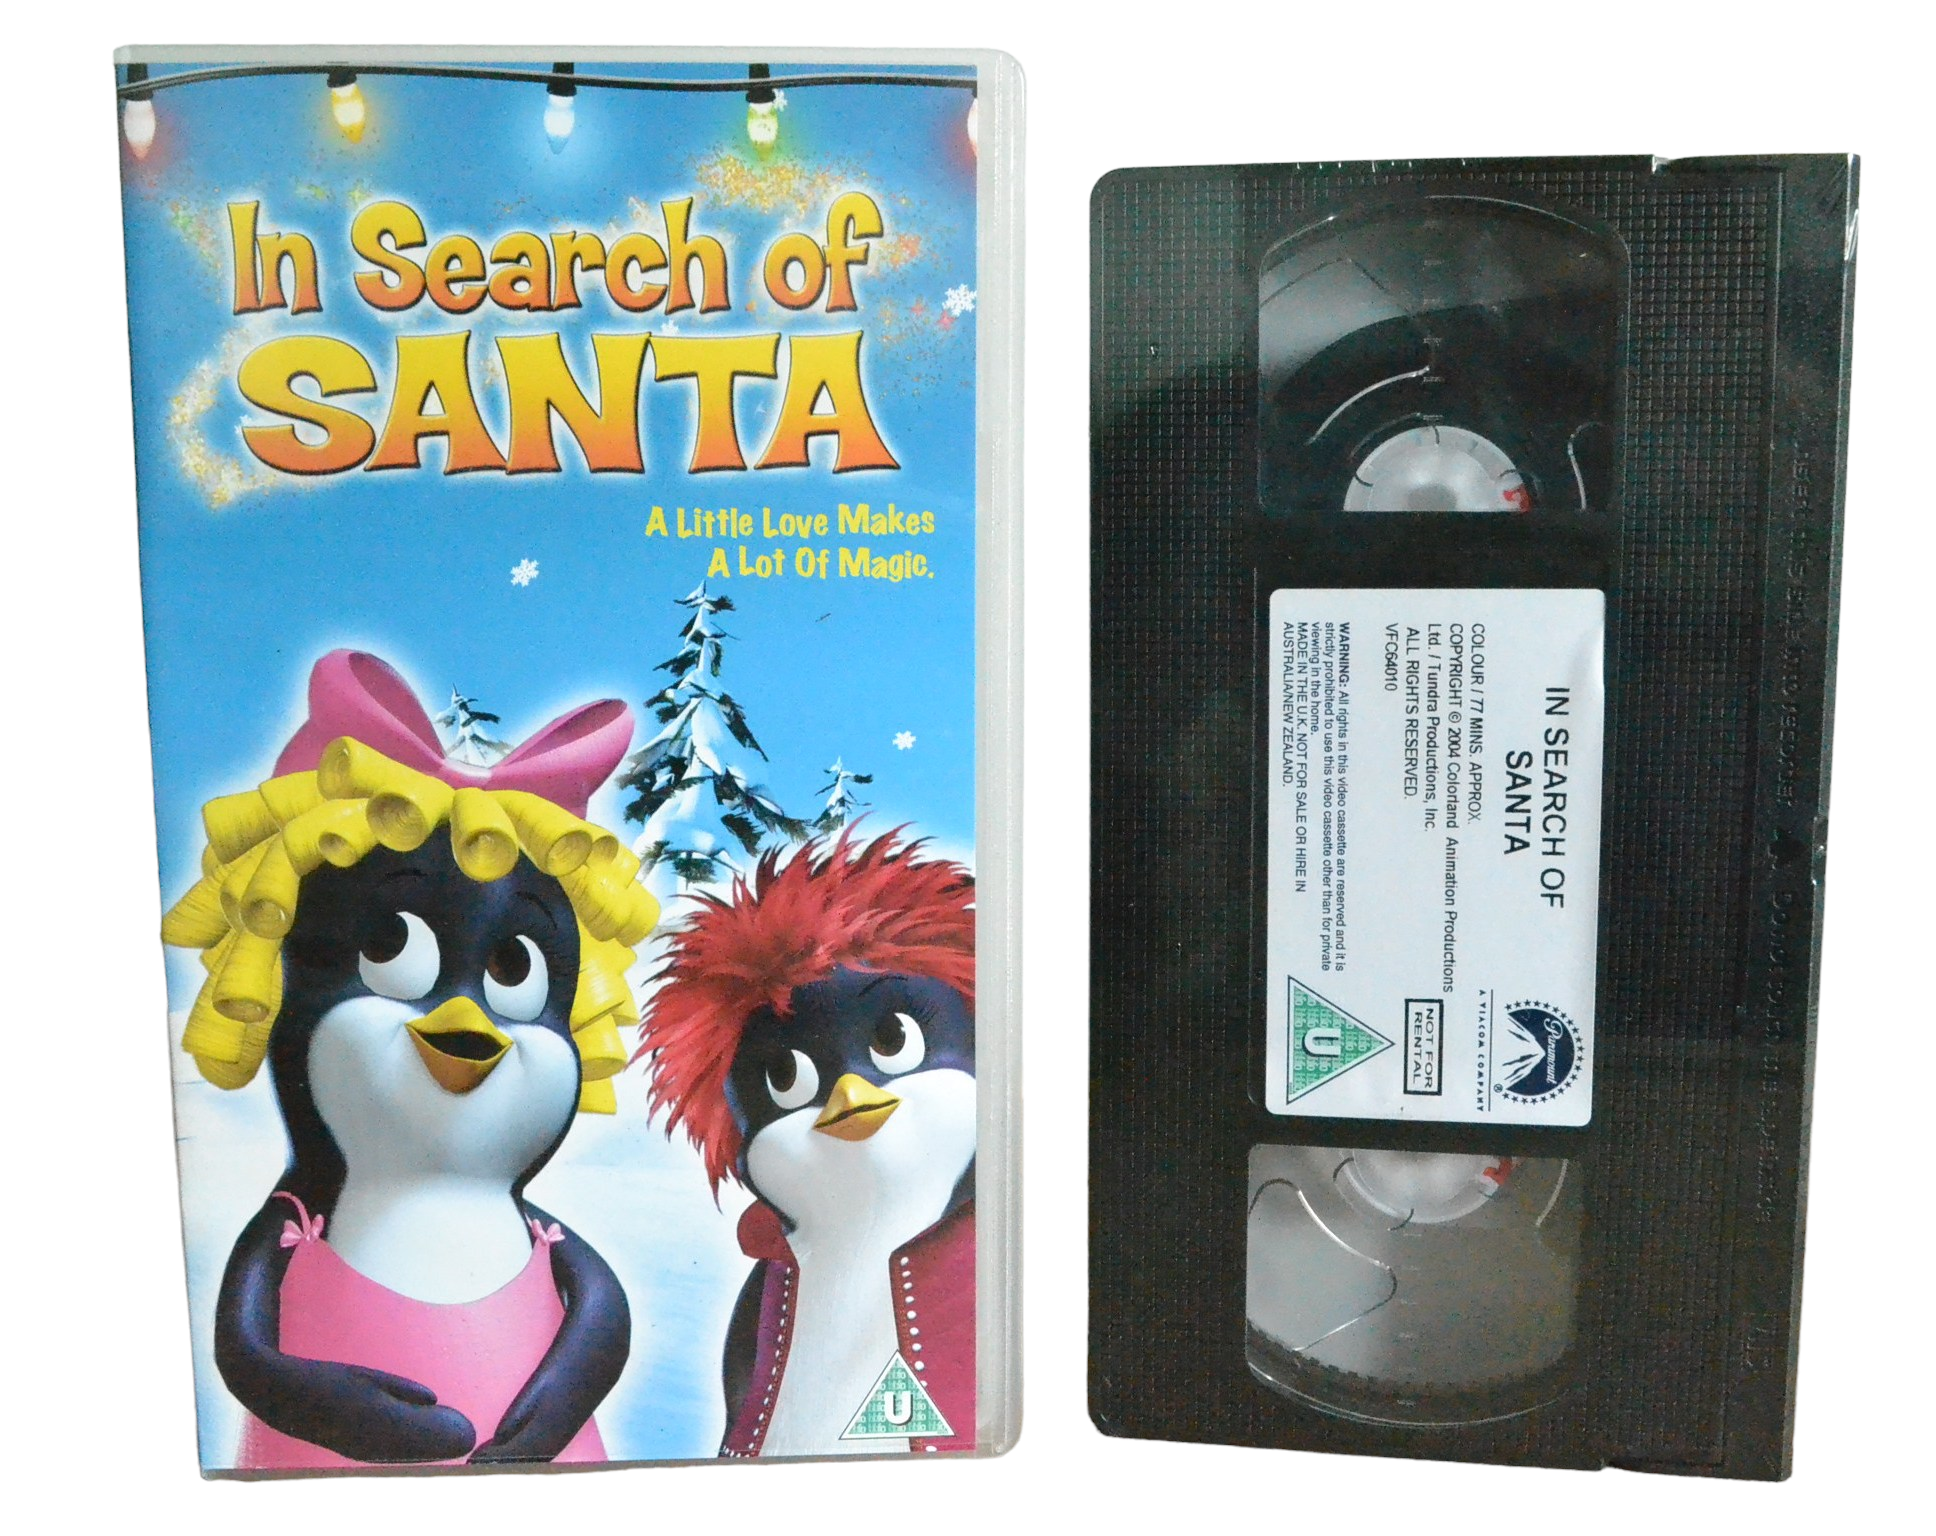 In Search Of Santa - Hilary Duff - Paramount Home Entertainment - VHR 5512 - Brand New Sealed - Pal - VHS-